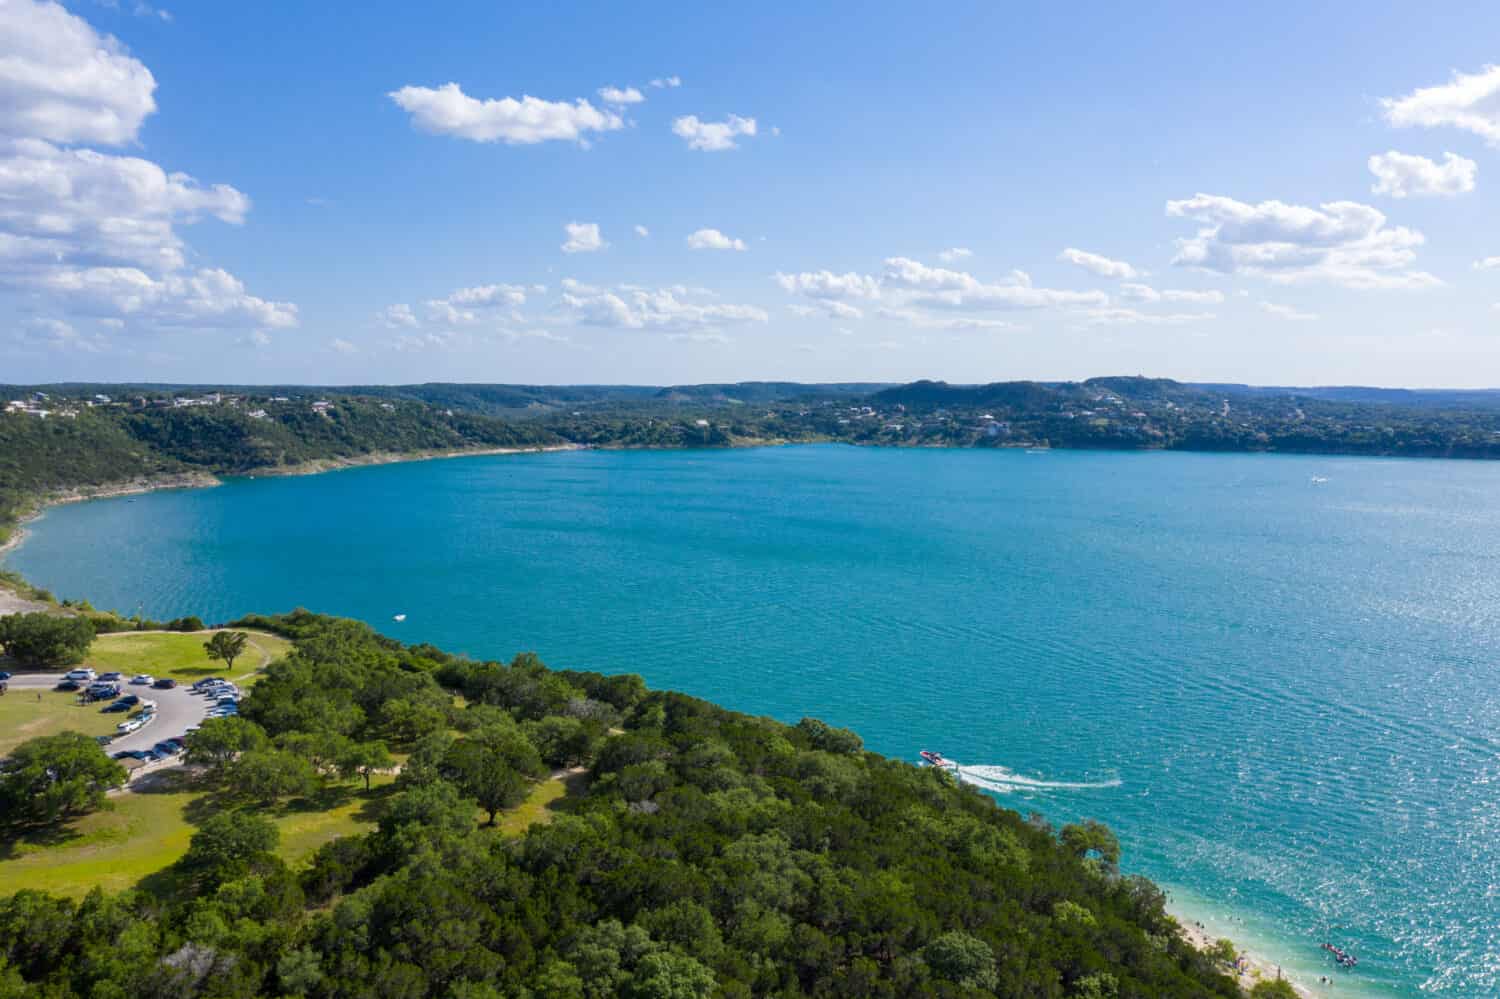 Aerial view of Canyon Lake, showcasing its picturesque landscape and tranquil waters in the Texas Hill Country